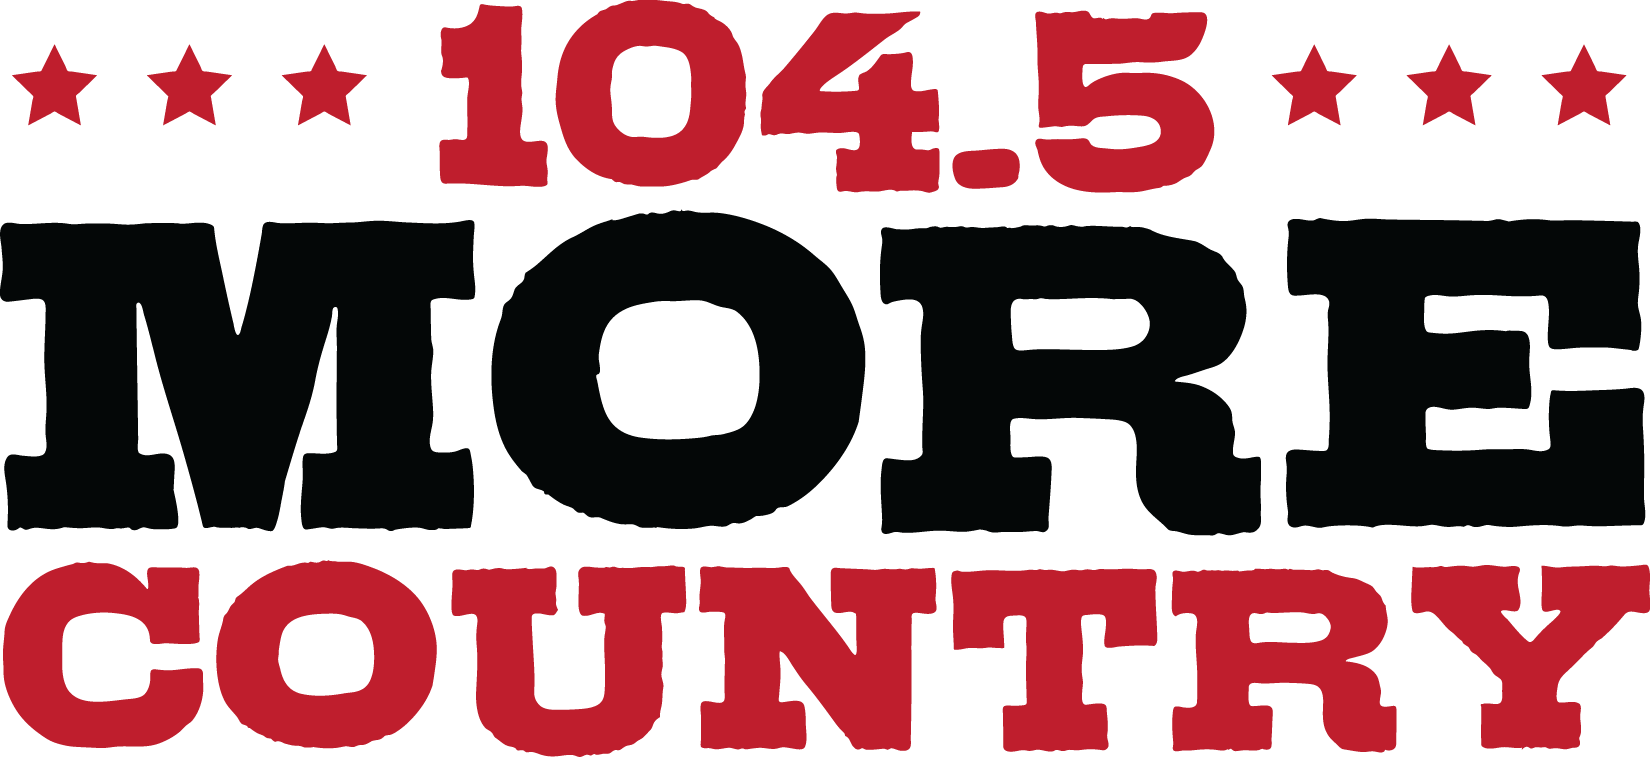 104.5-MoreCountry (002).png